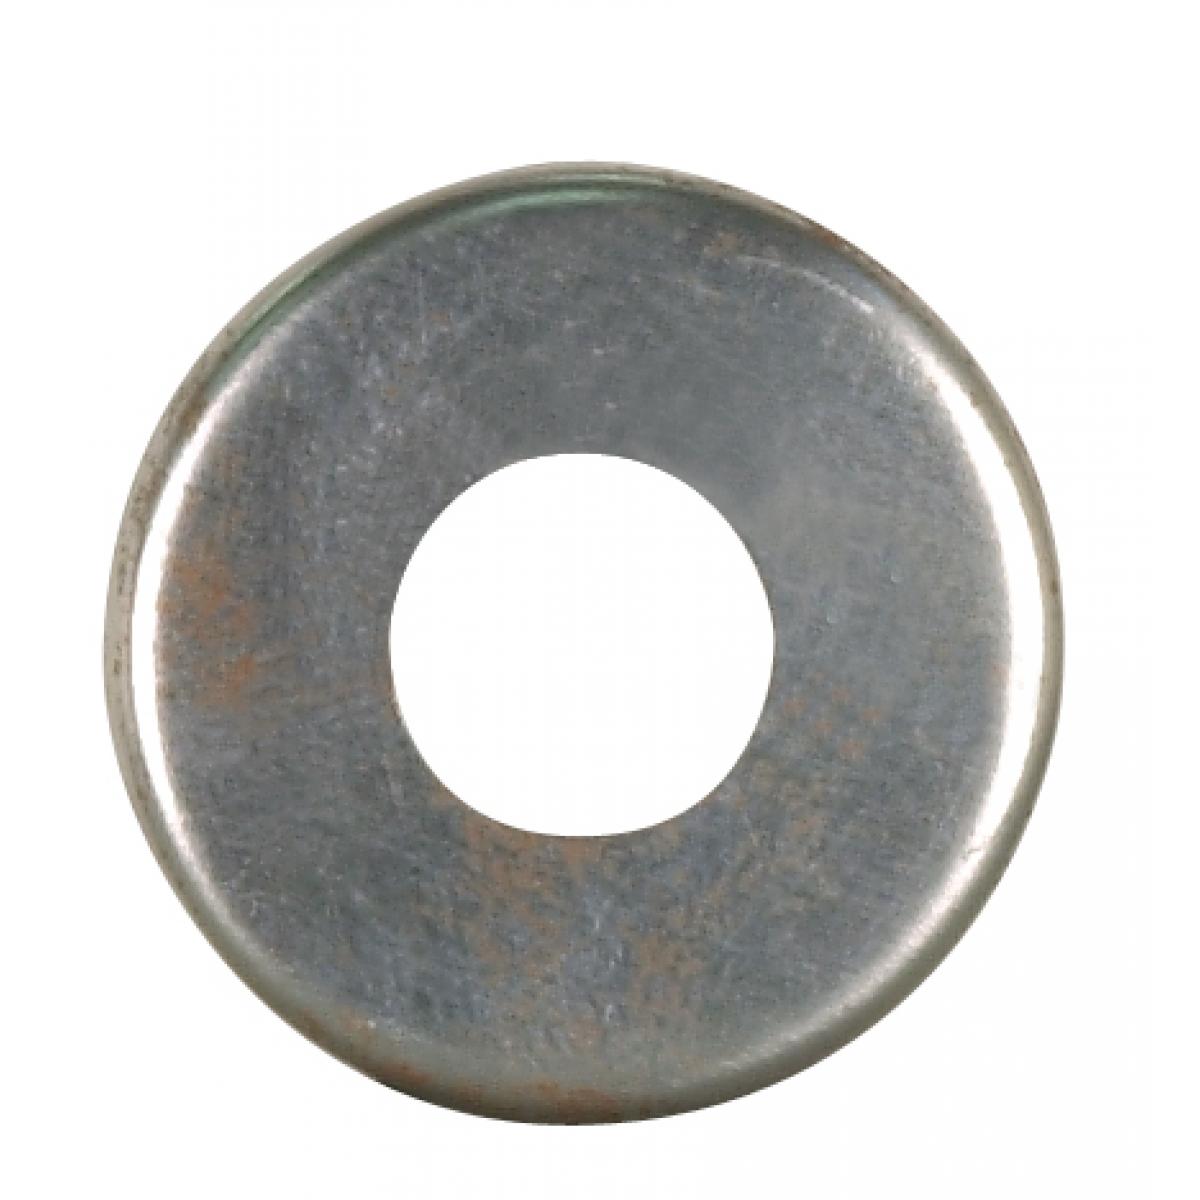 Satco 90-2077 Steel Check Ring Curled Edge 1/4 IP Slip Unfinished 2" Diameter